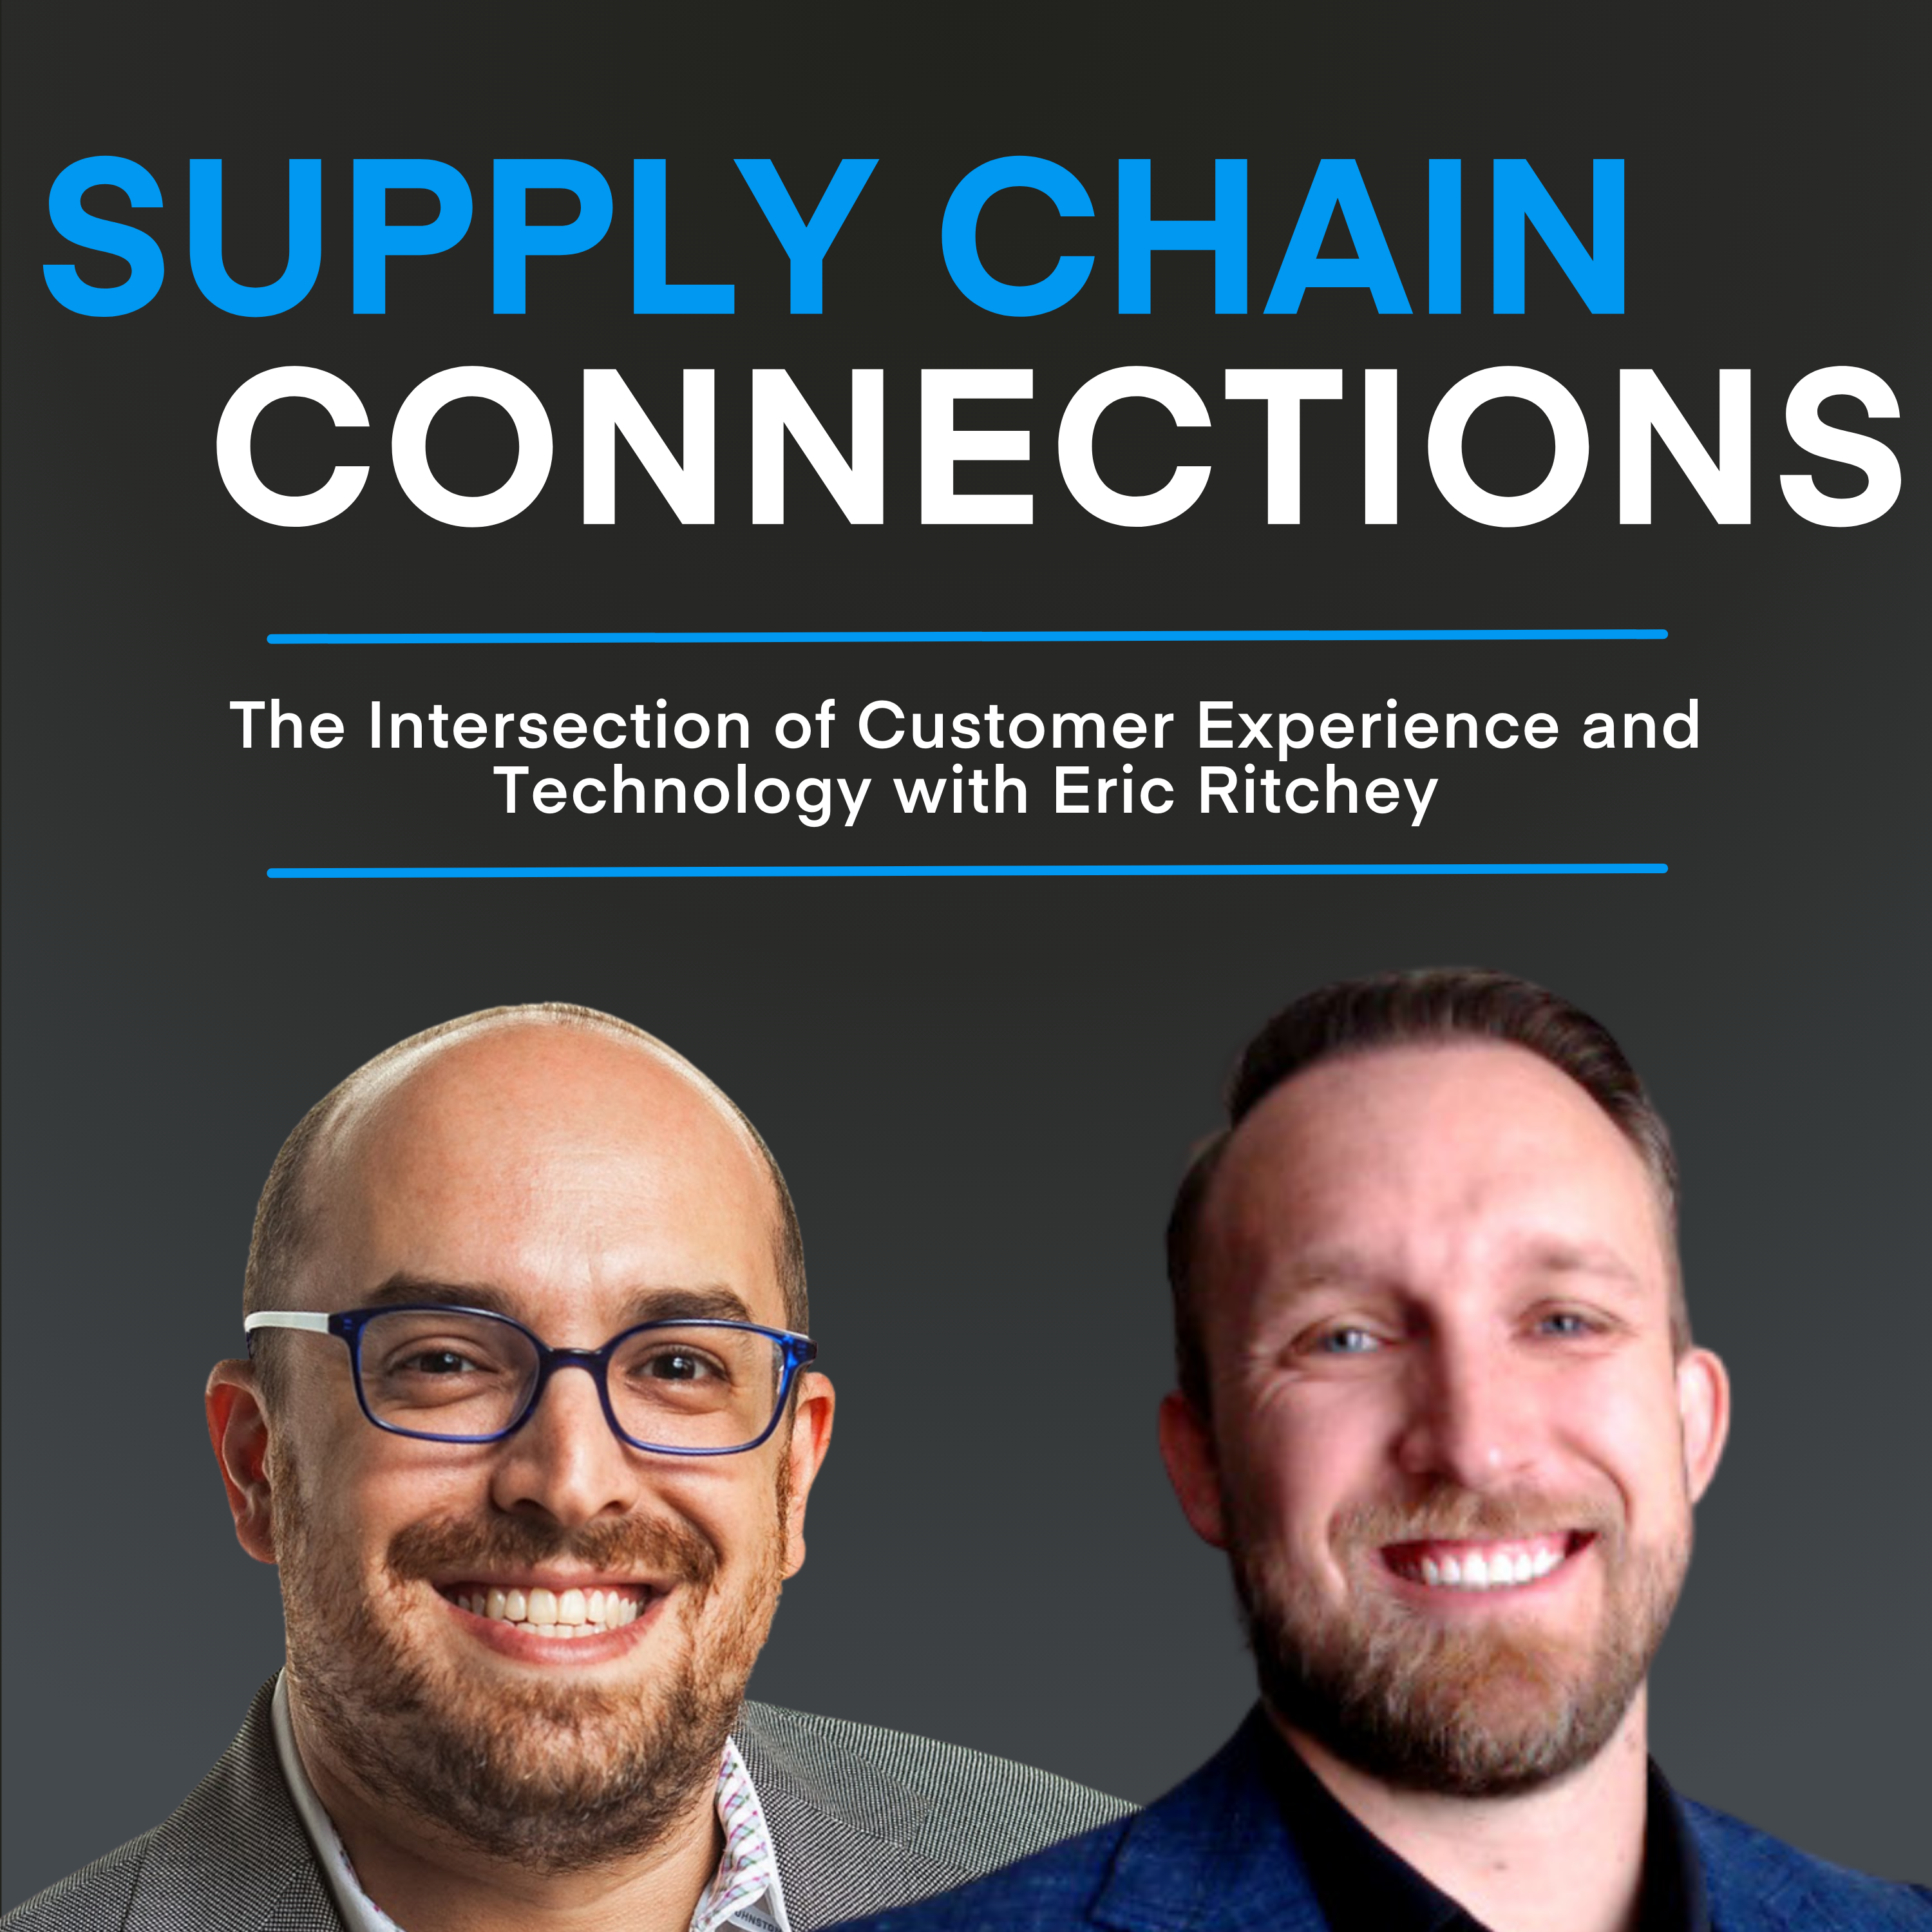 Chain.io supply chain connections podcast, with Eric Ritchey of Panda Logistics